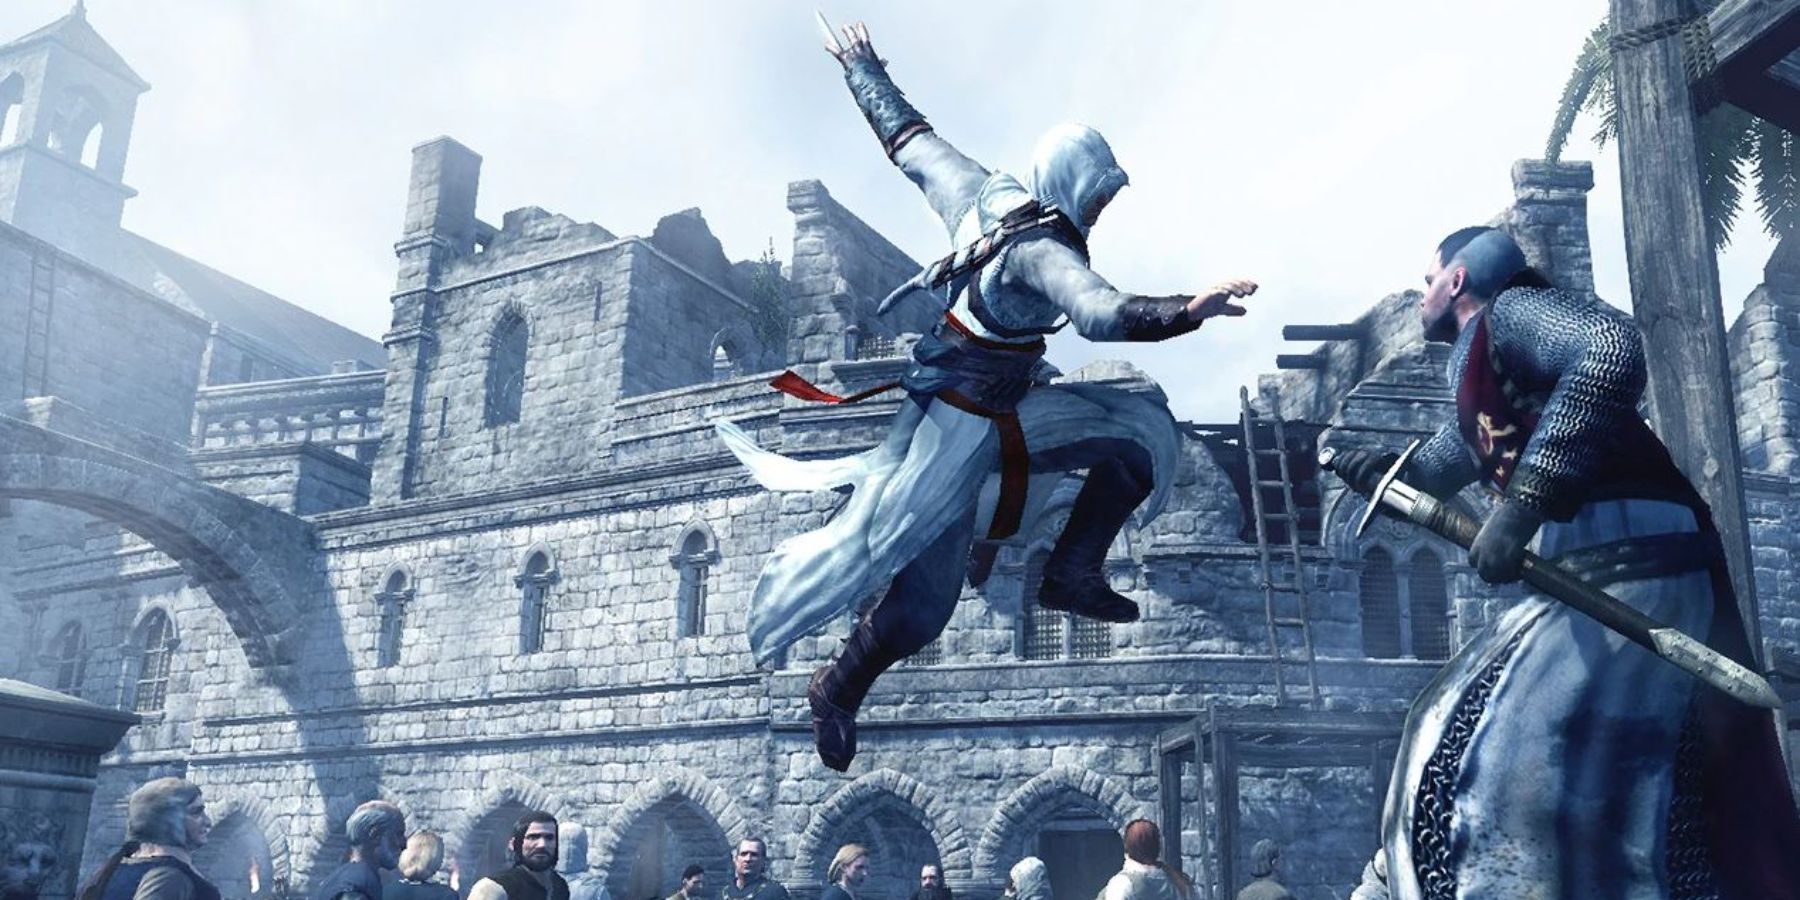 Altair engaging a soldier